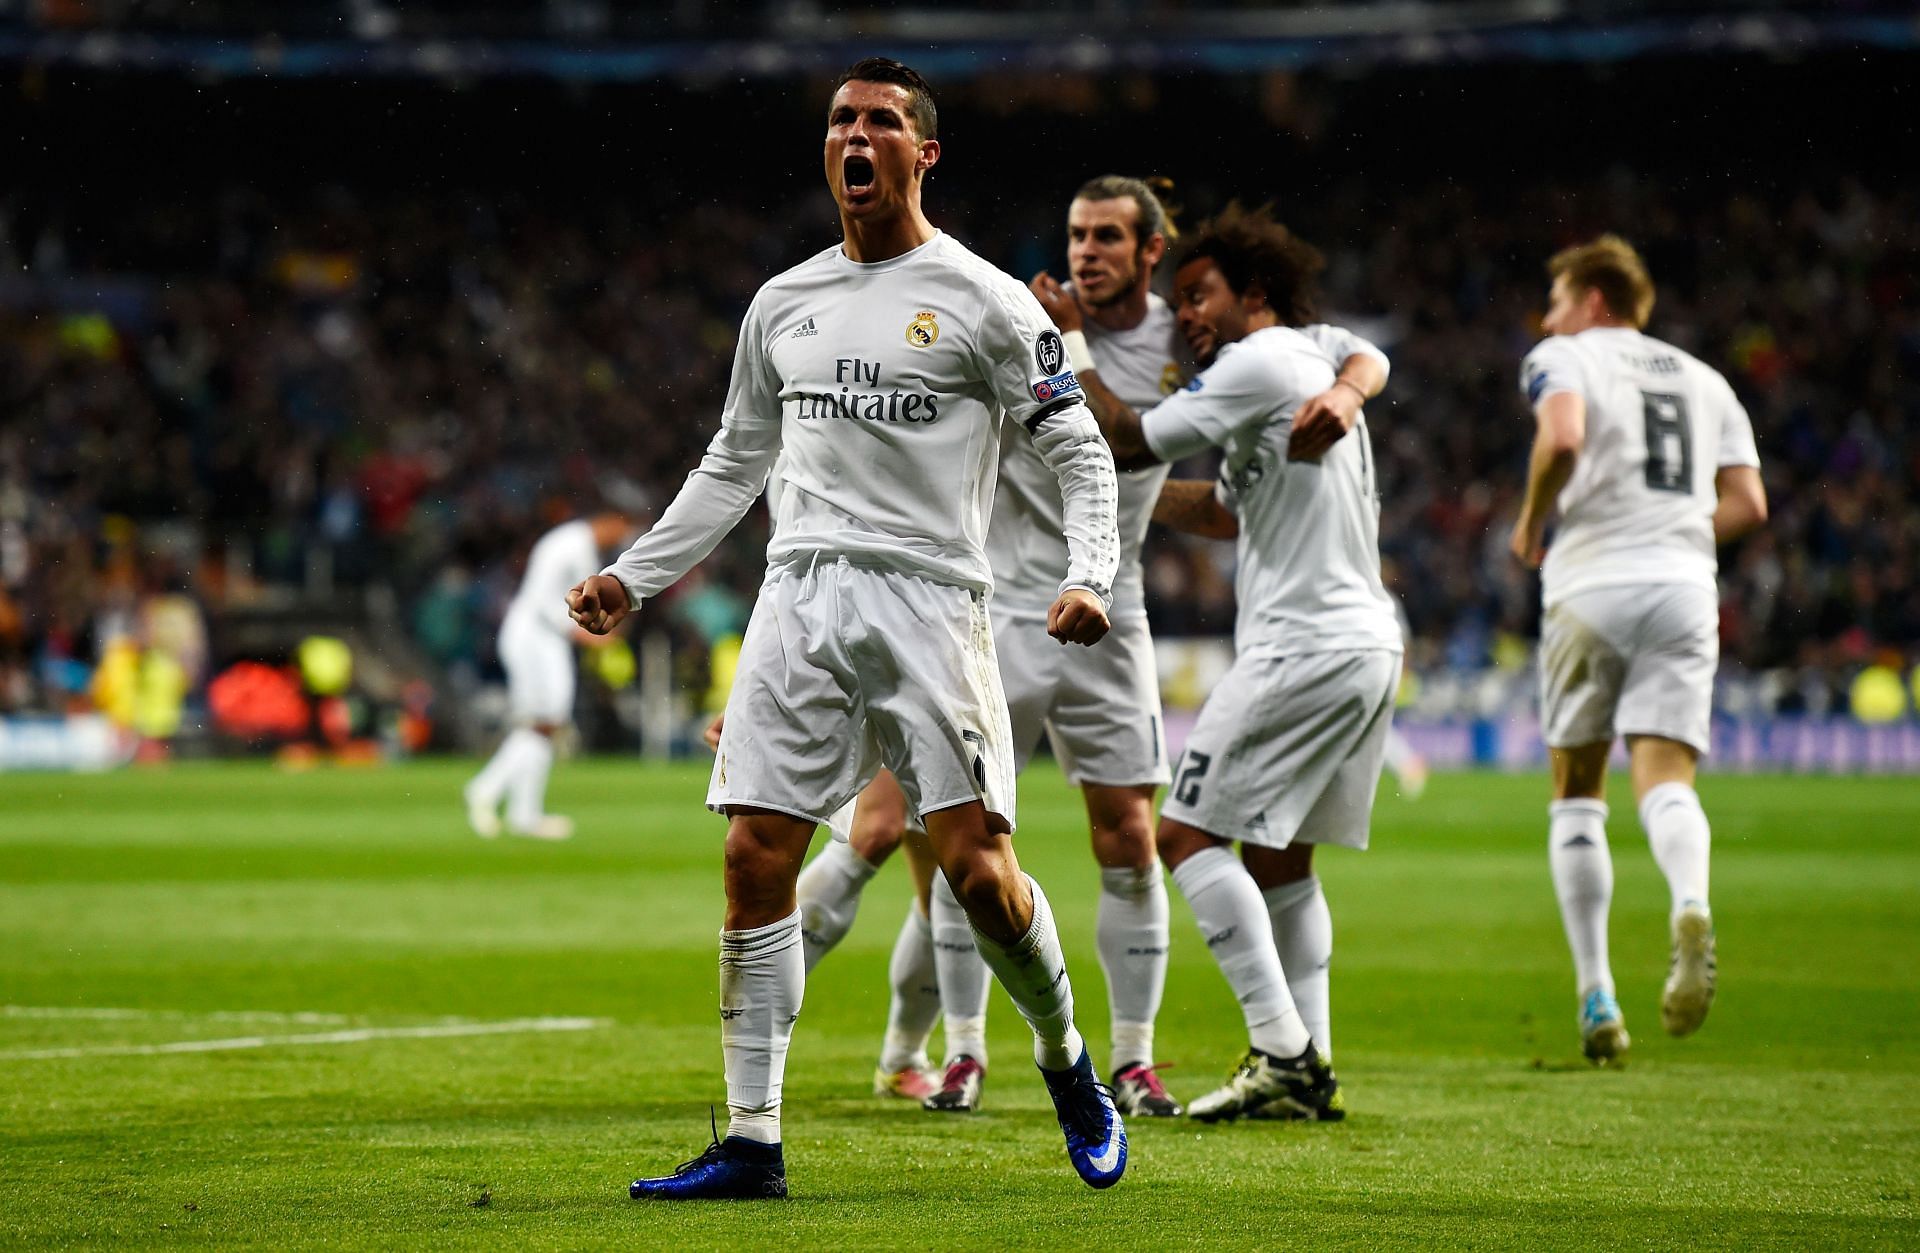 CR7 delivered a goalscoring masterclasss yet again in the Champions League to save his team